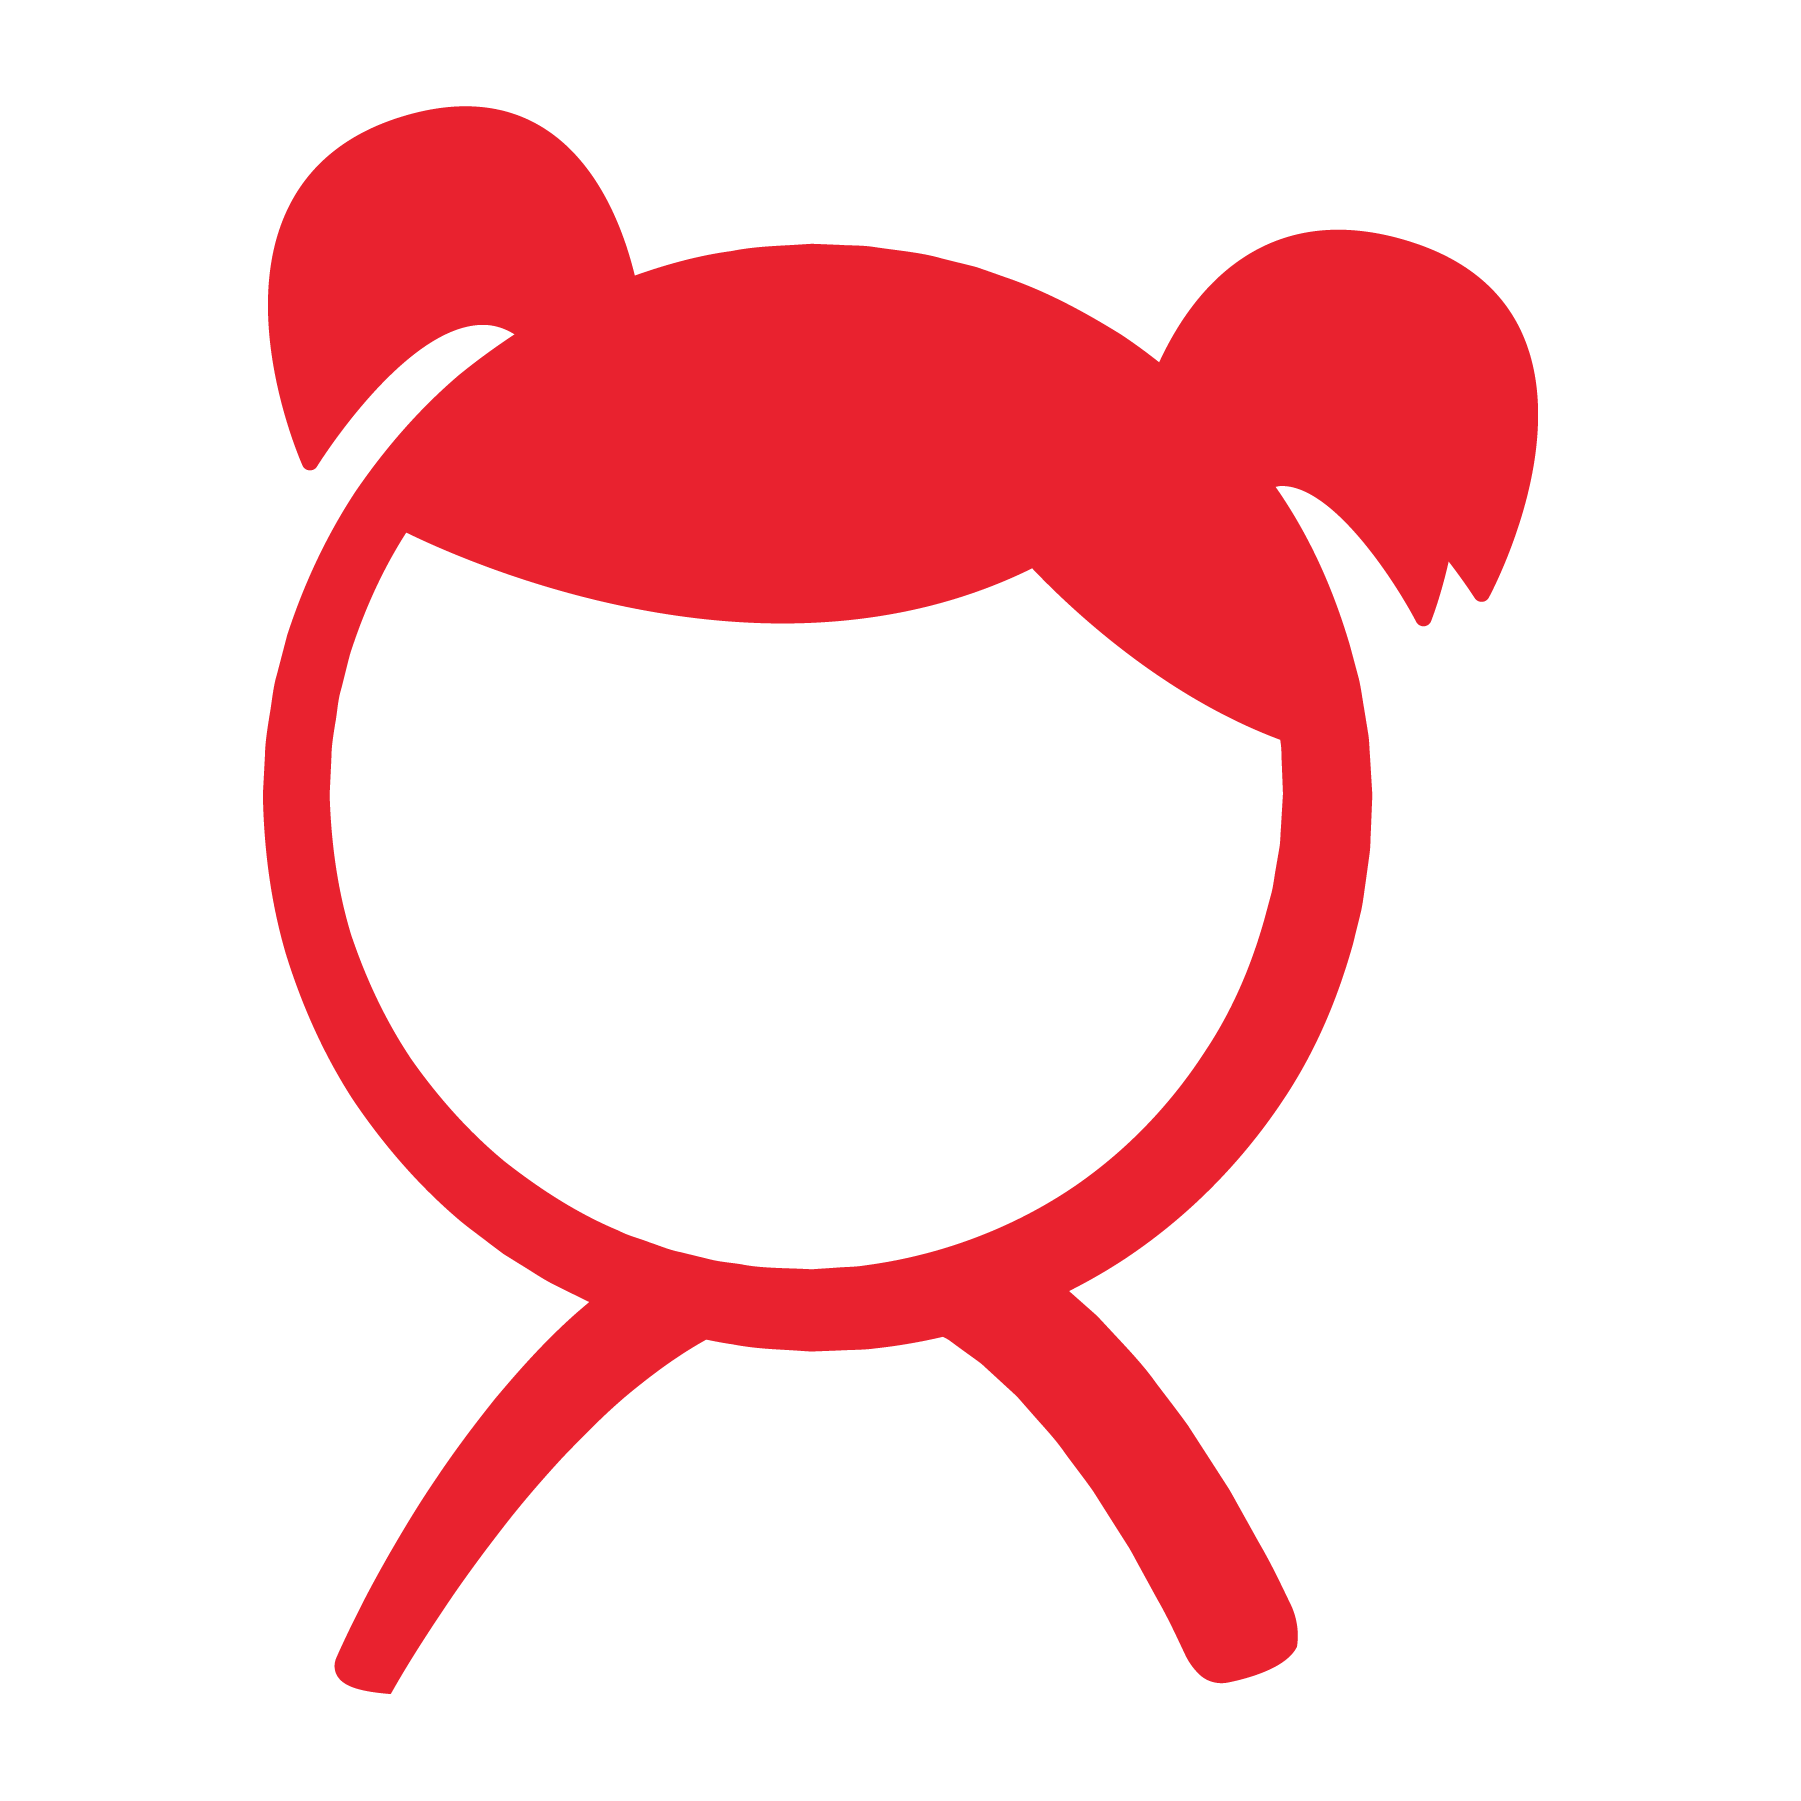 Icon of a young girl with pigtails, representing our commitment to early childhood education and readiness. Image credit: Save the Children, 2017.